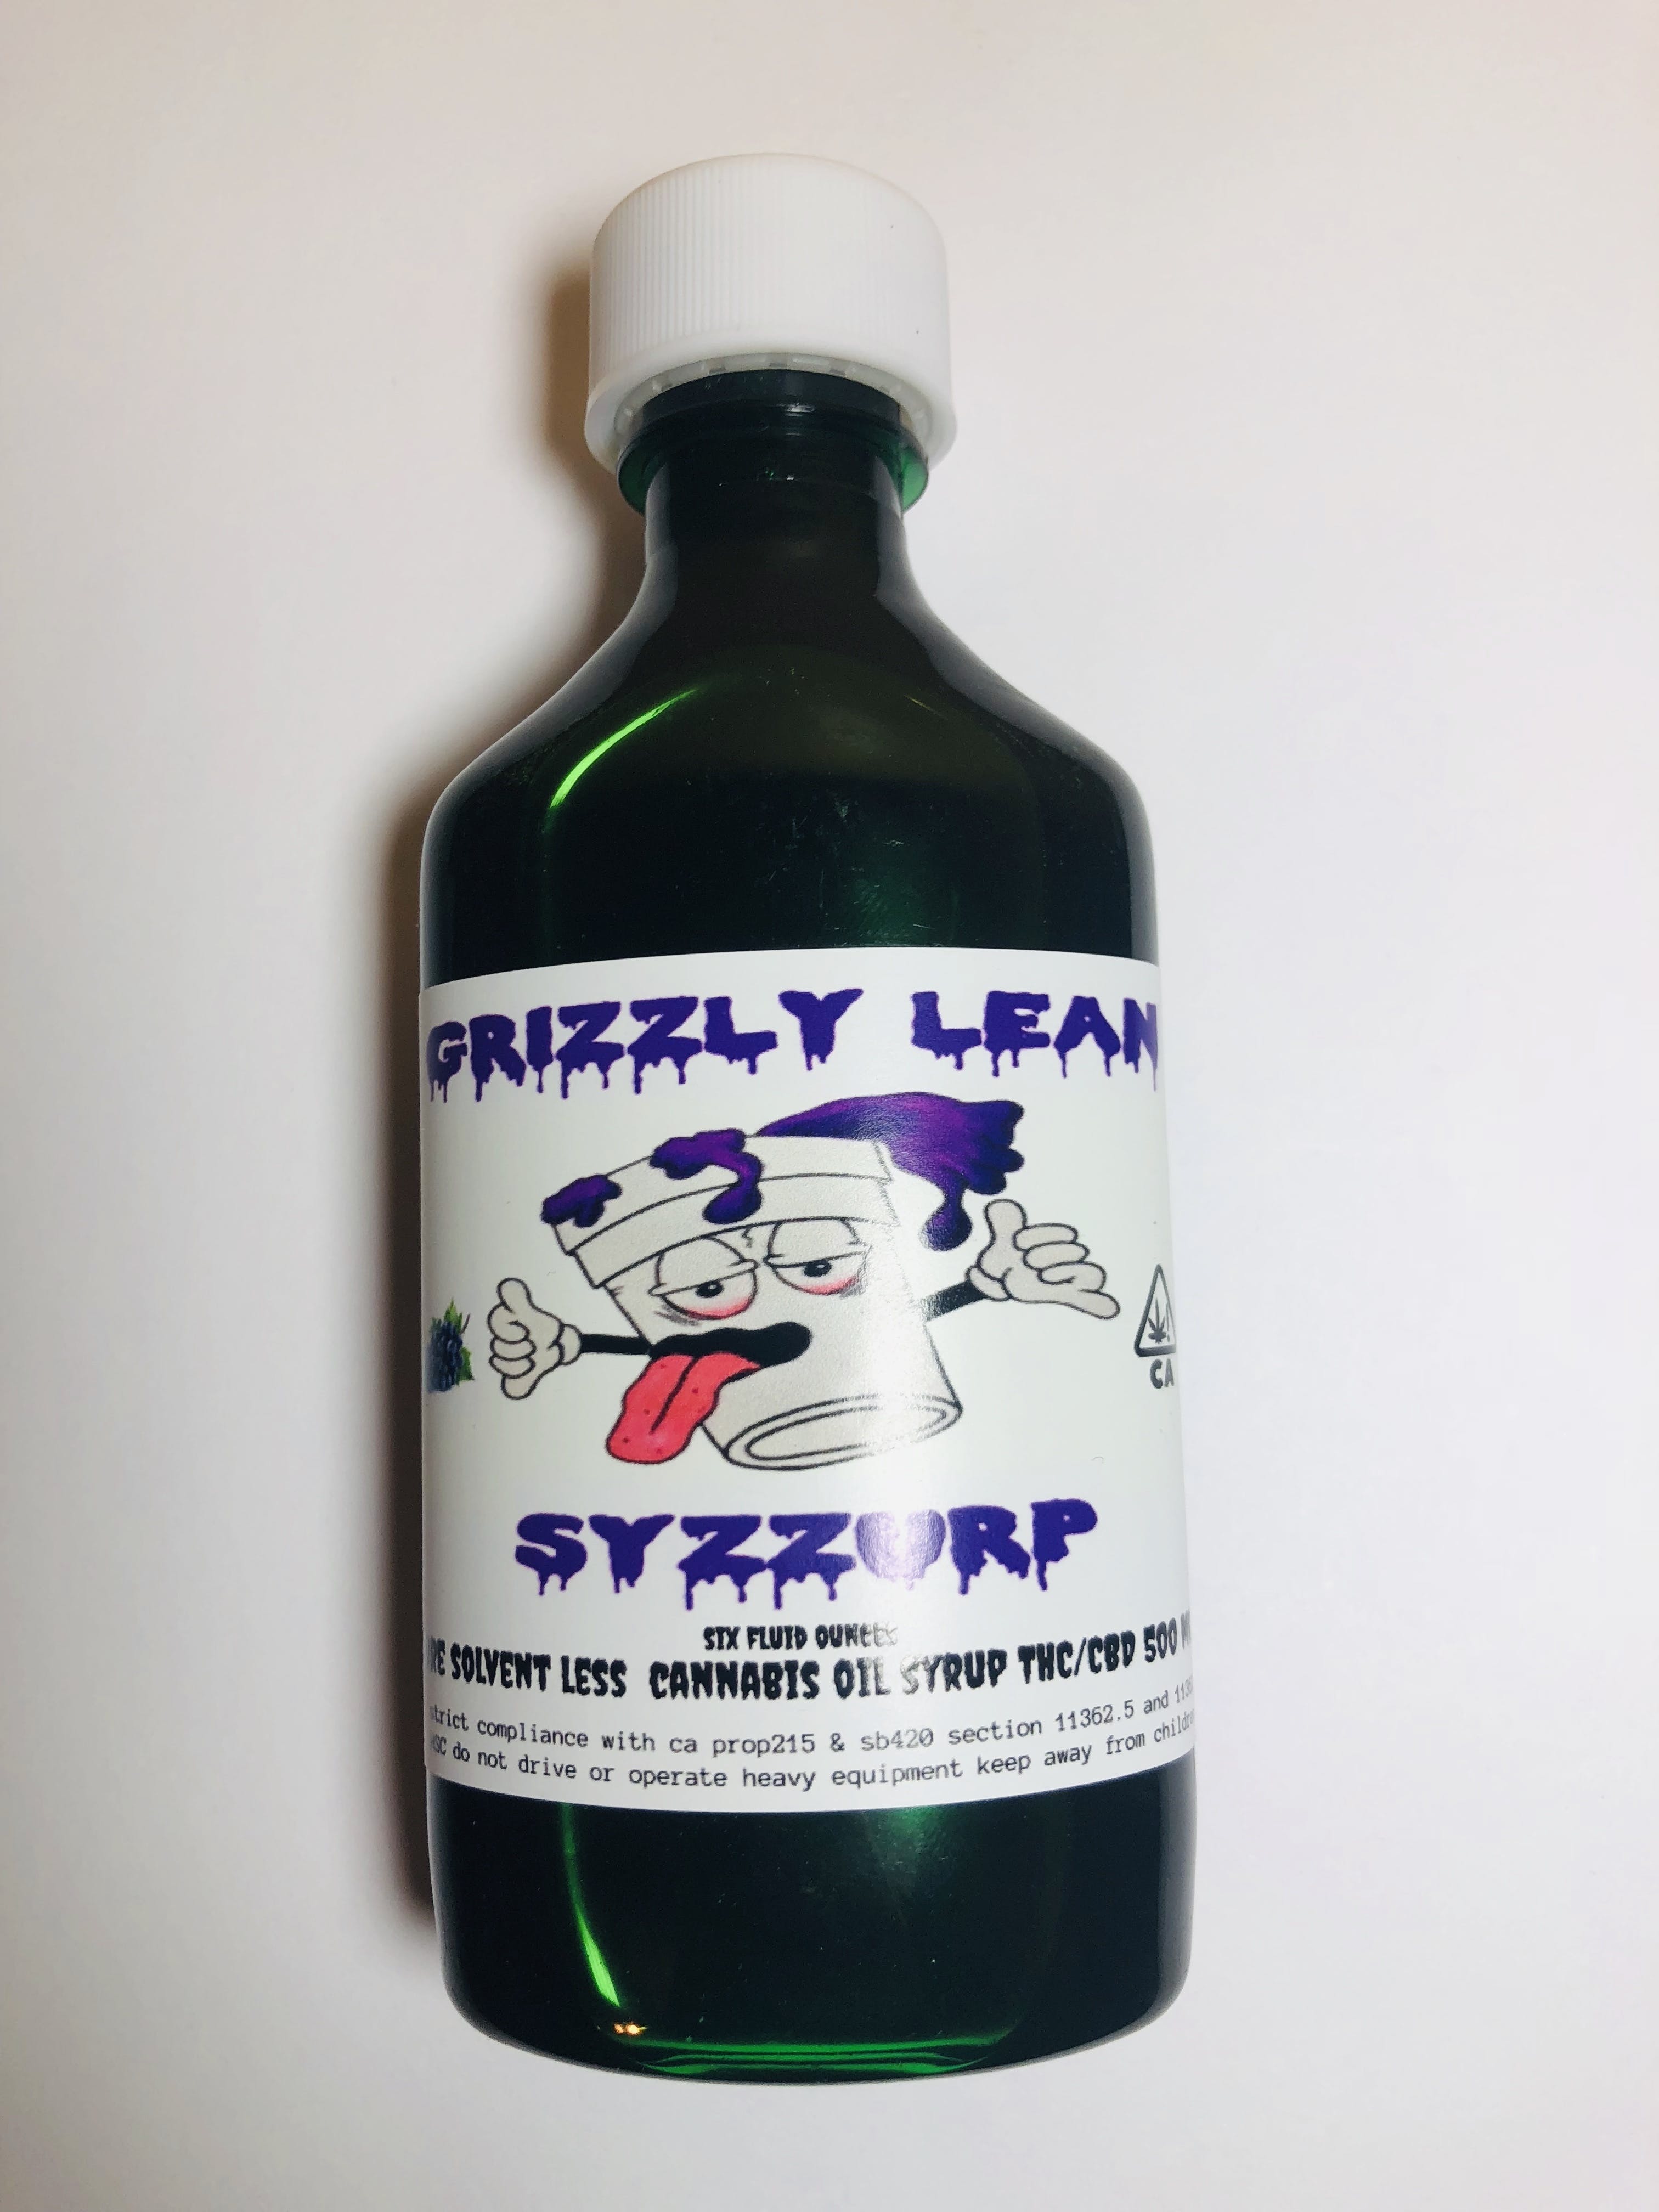 marijuana-dispensaries-call-for-address-riverside-grizzly-lean-500-mg-syrup